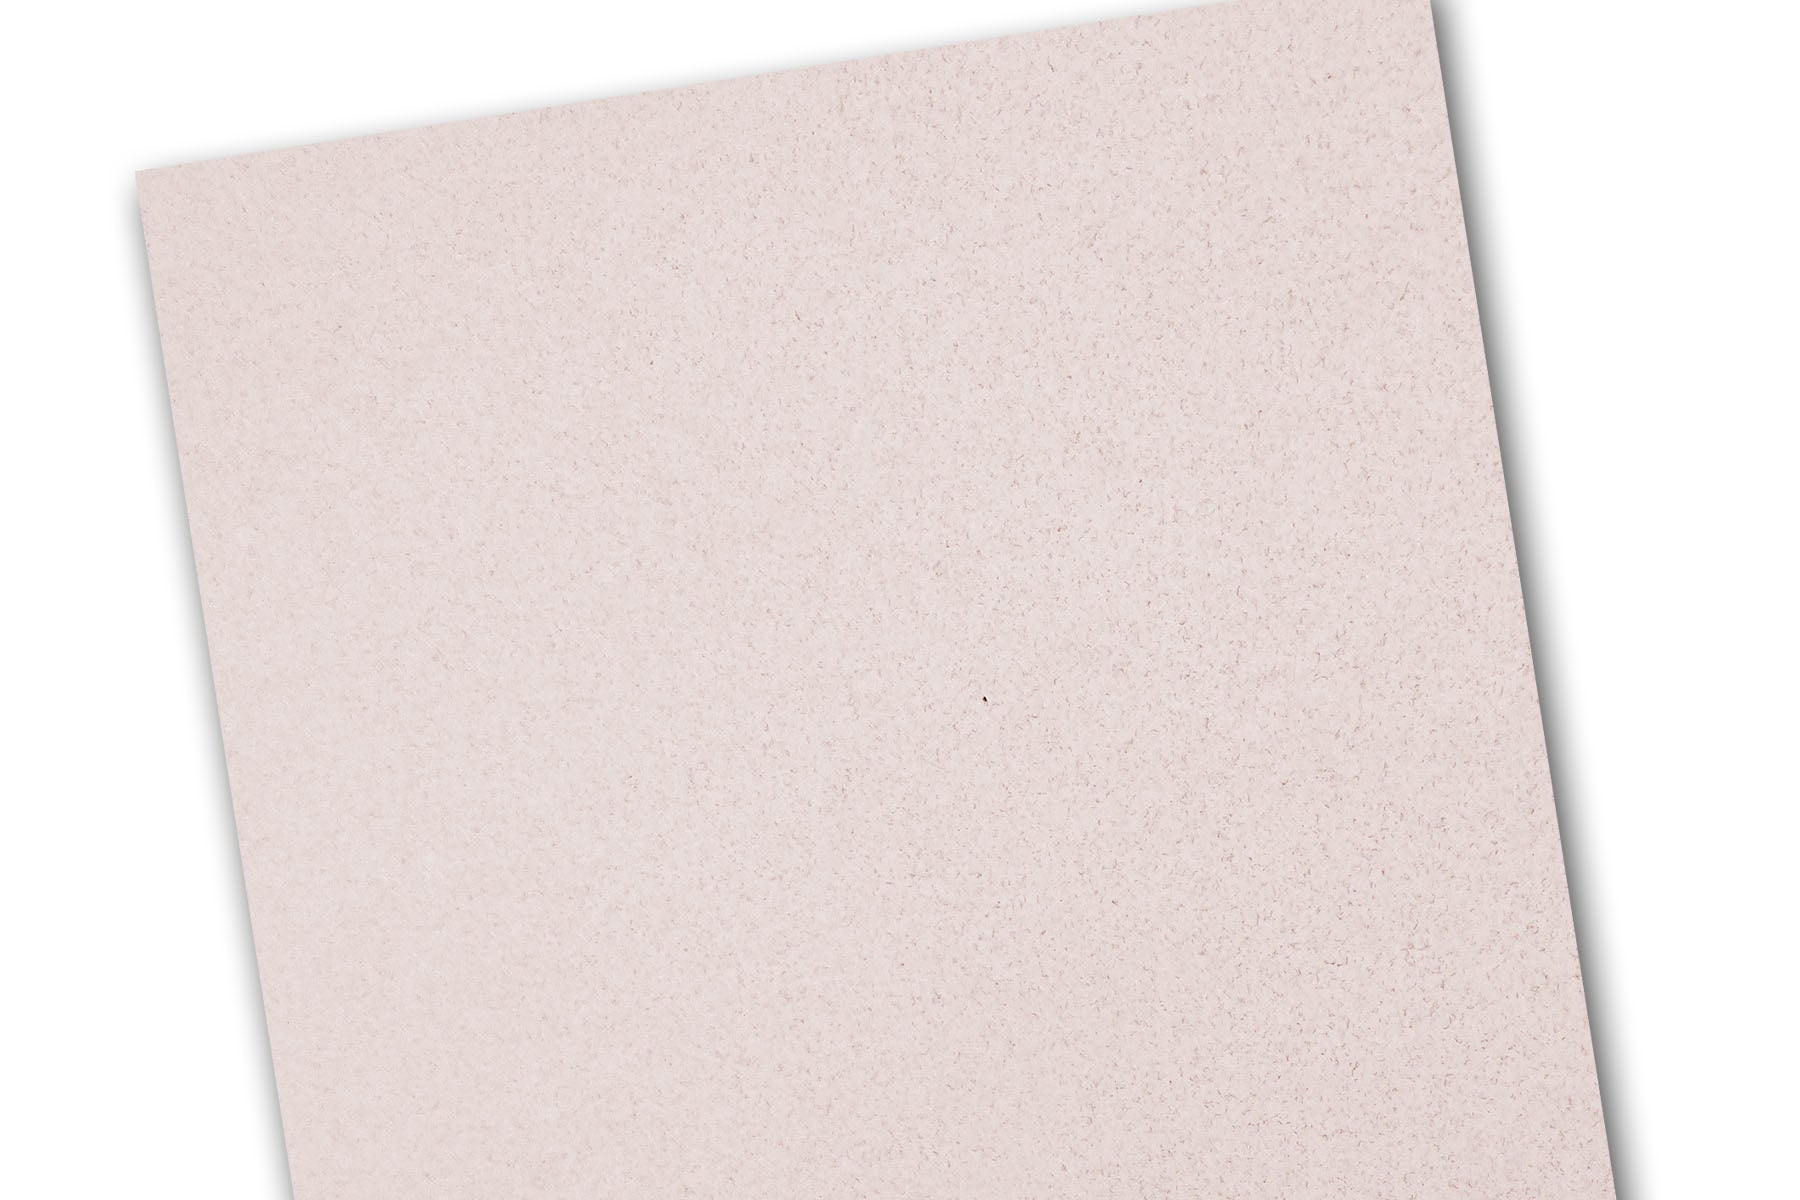 Classic Laid White Frost 80 lb Cardstock 8.5x11 - Closeout